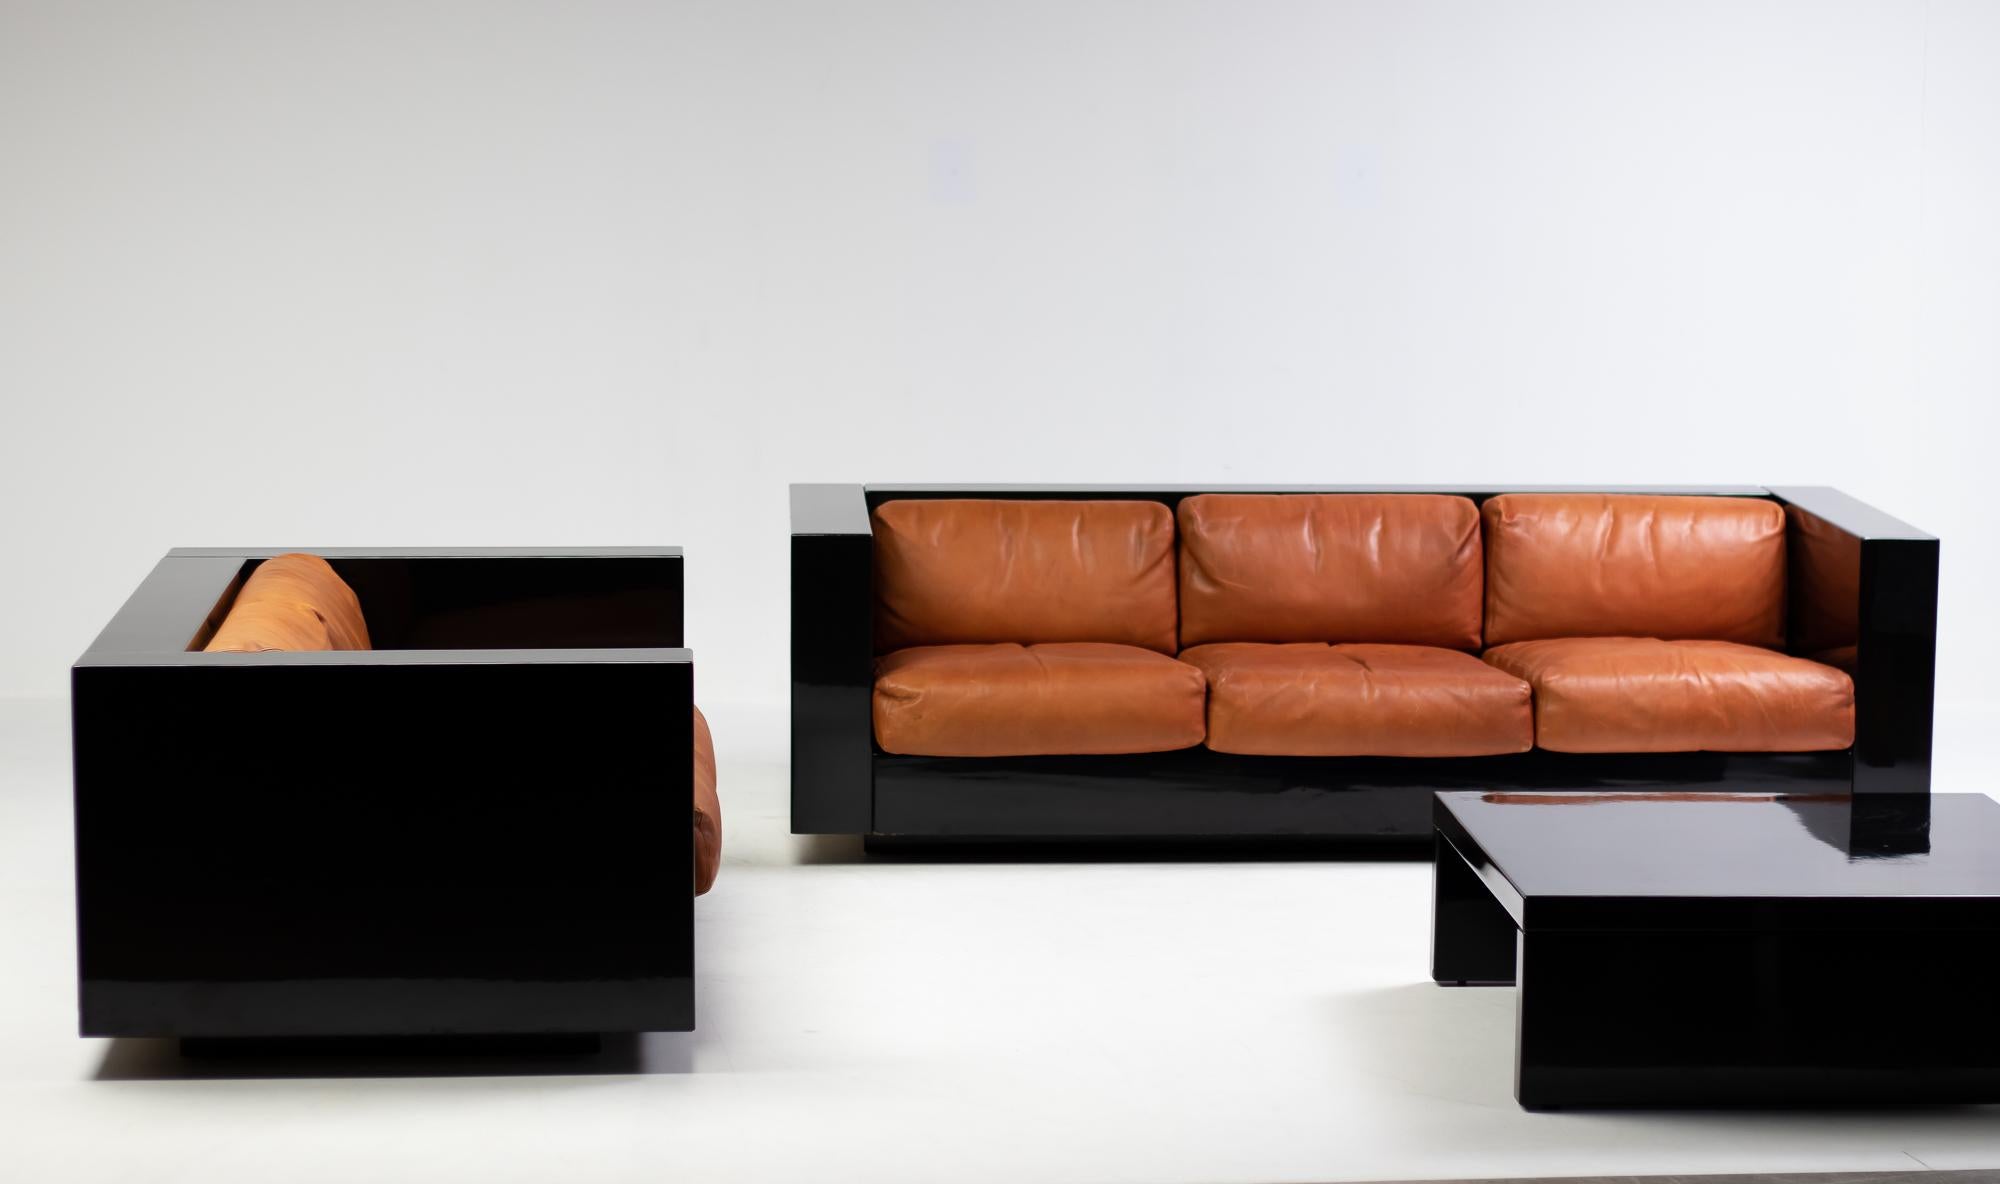 Massimo and Lella Vignelli for Poltronova 'Saratoga' living room set, black lacquered wood and cognac leather, Italy, 1964. 
This set of two-seater sofa, three-seater sofa and sofa table named Saratoga is designed by Italian designer couple Lella &